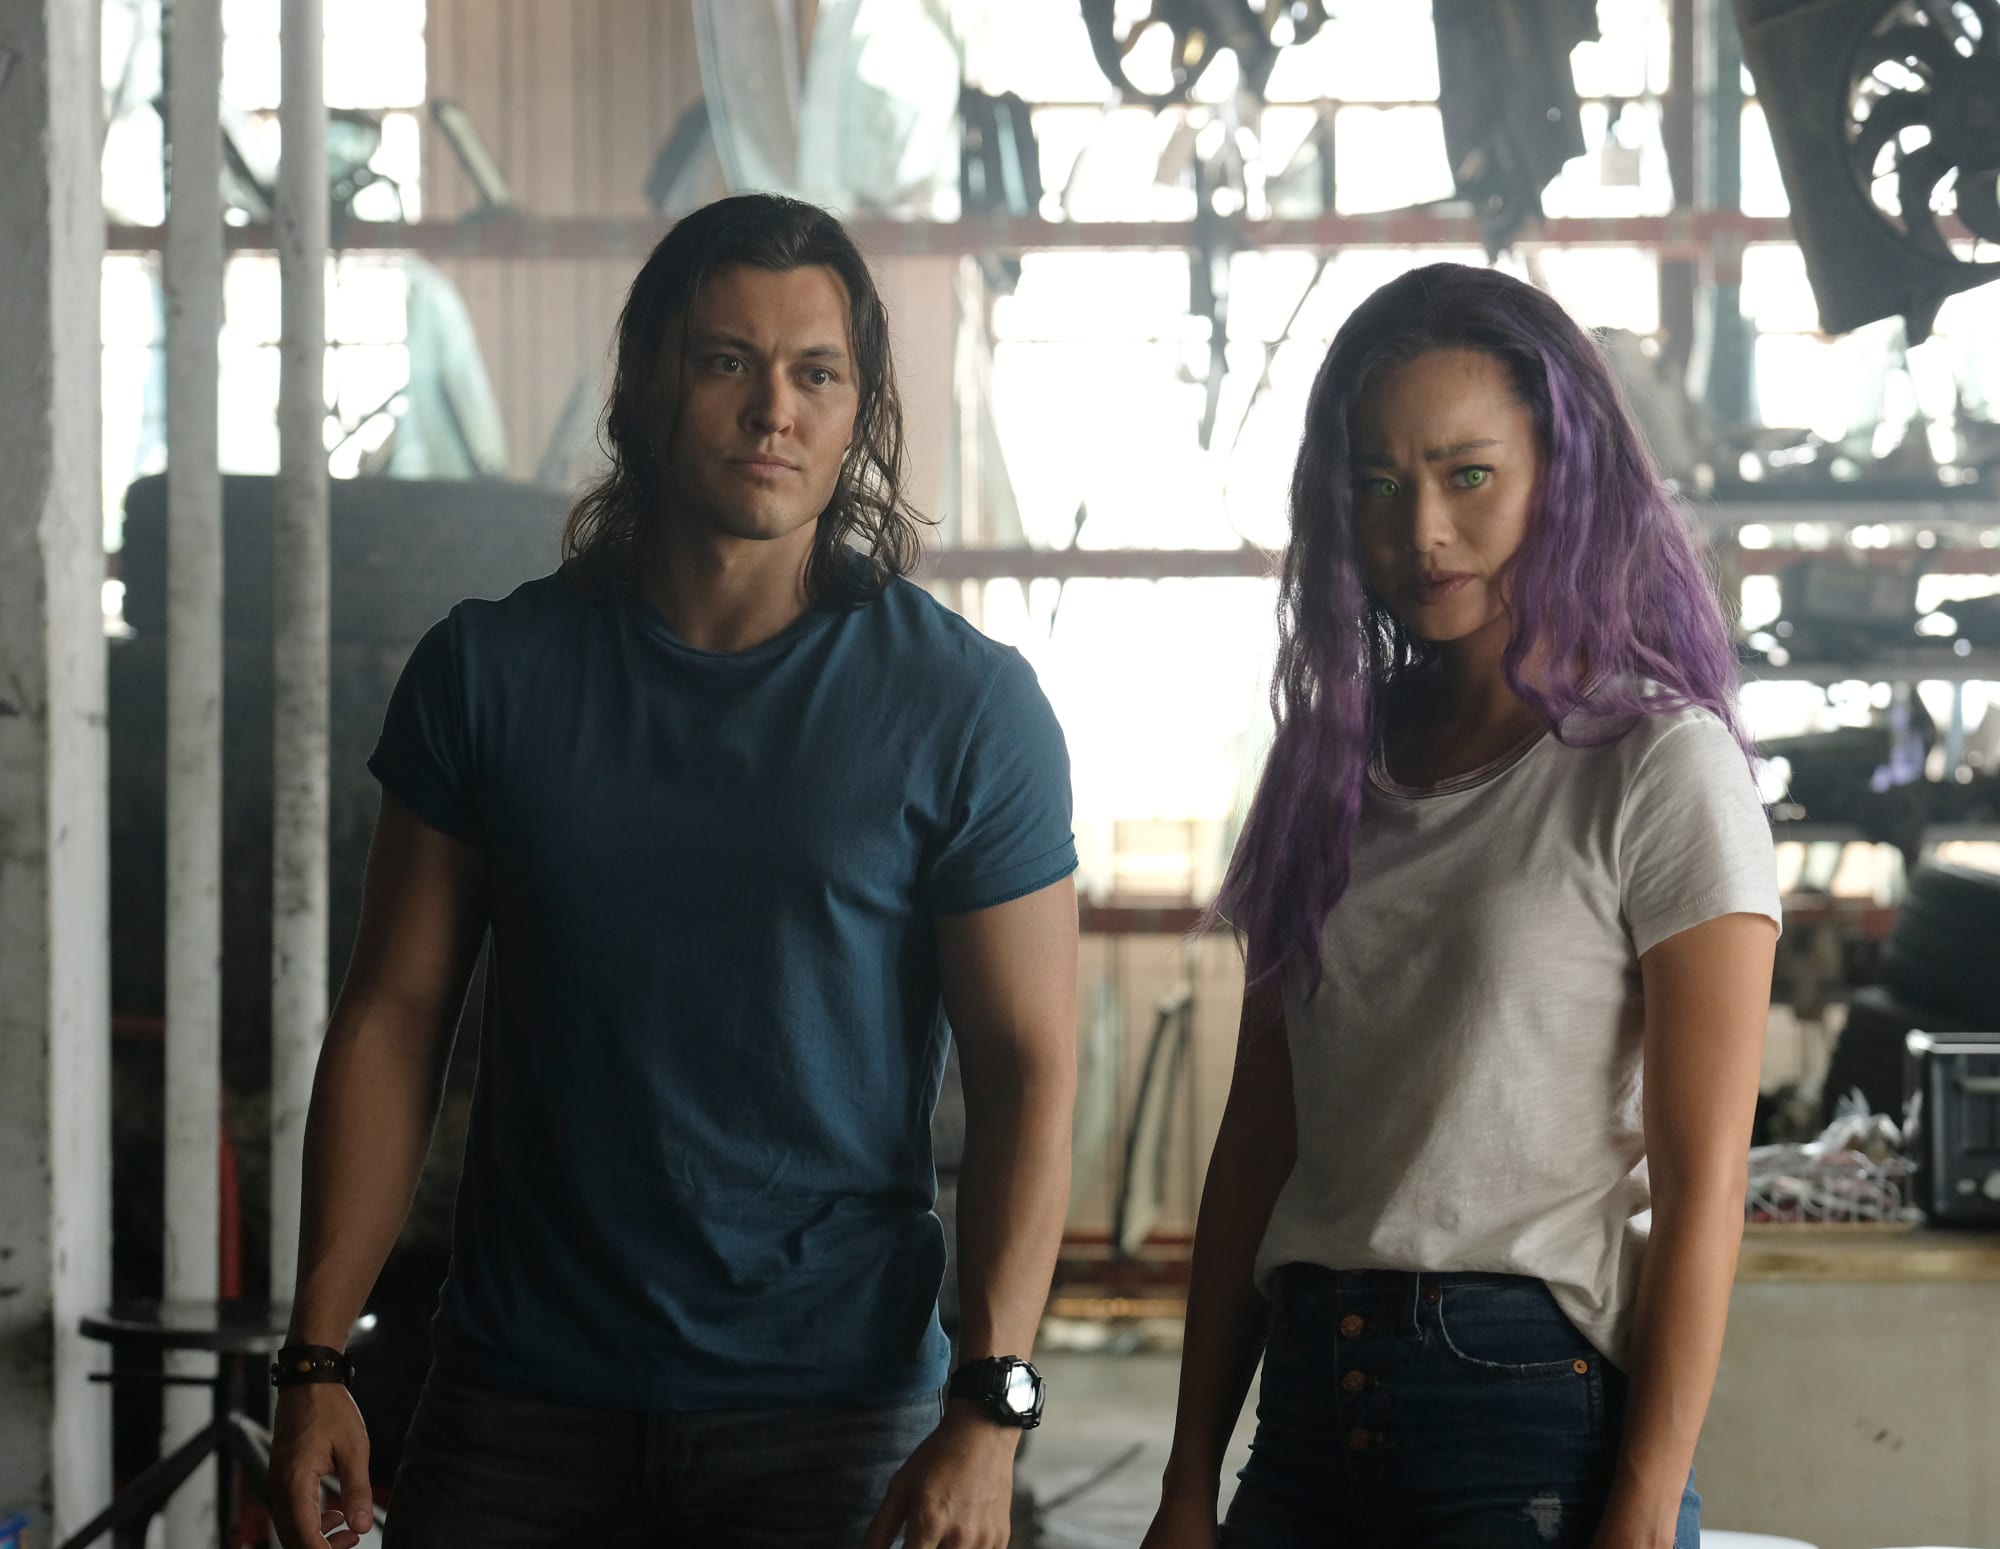 How to watch The Gifted Season 2 Episode 2, "unMoored," online